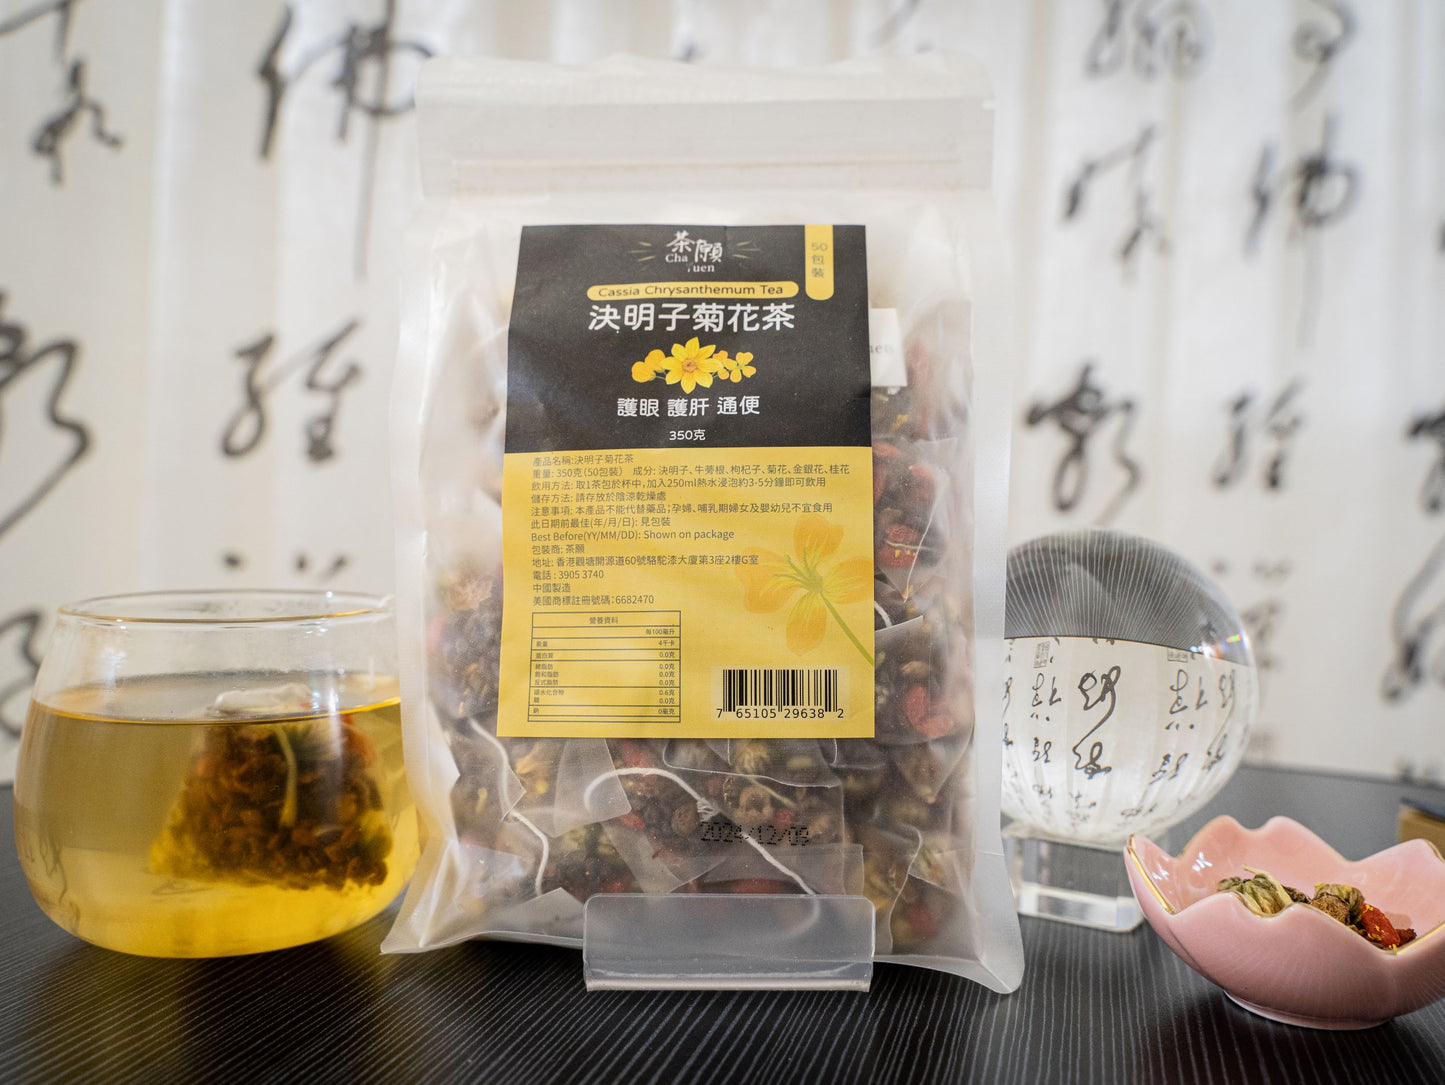 Cha Yuen – 50pcs Cassia Chrysanthemum Tea Eyes-Caring Herbal Tea Bags Protect eyes & liver and Help defecation smooth